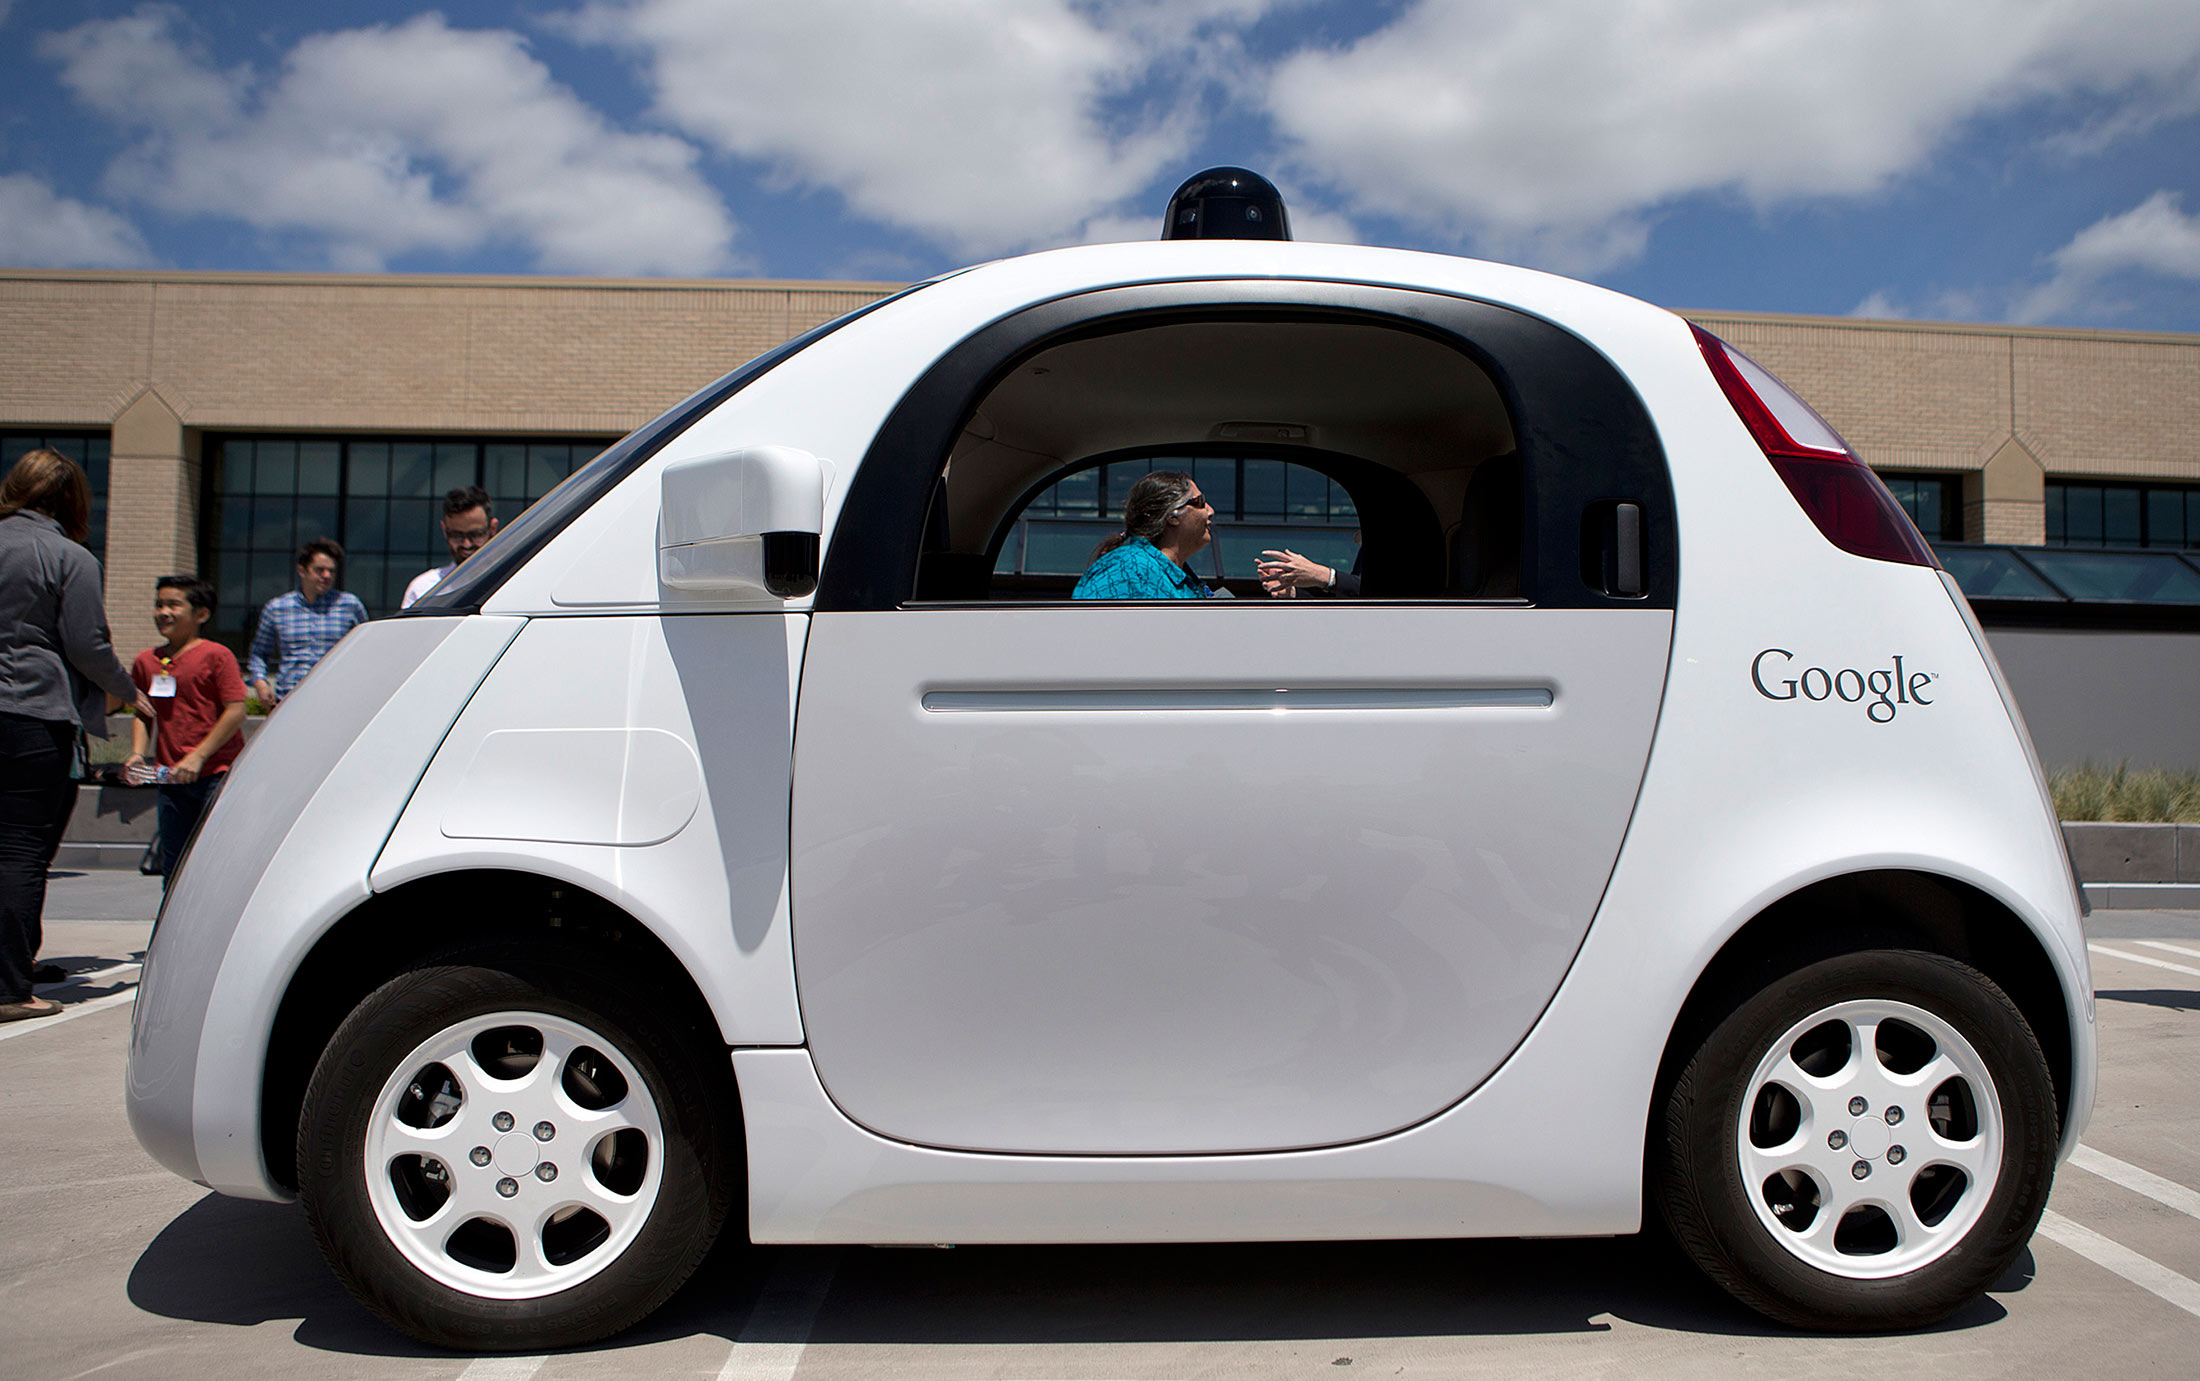 The two-seater prototype of Google's self-driving car is ready for demonstration at Google on May 13, 2015 in Mountain View, Calif.
